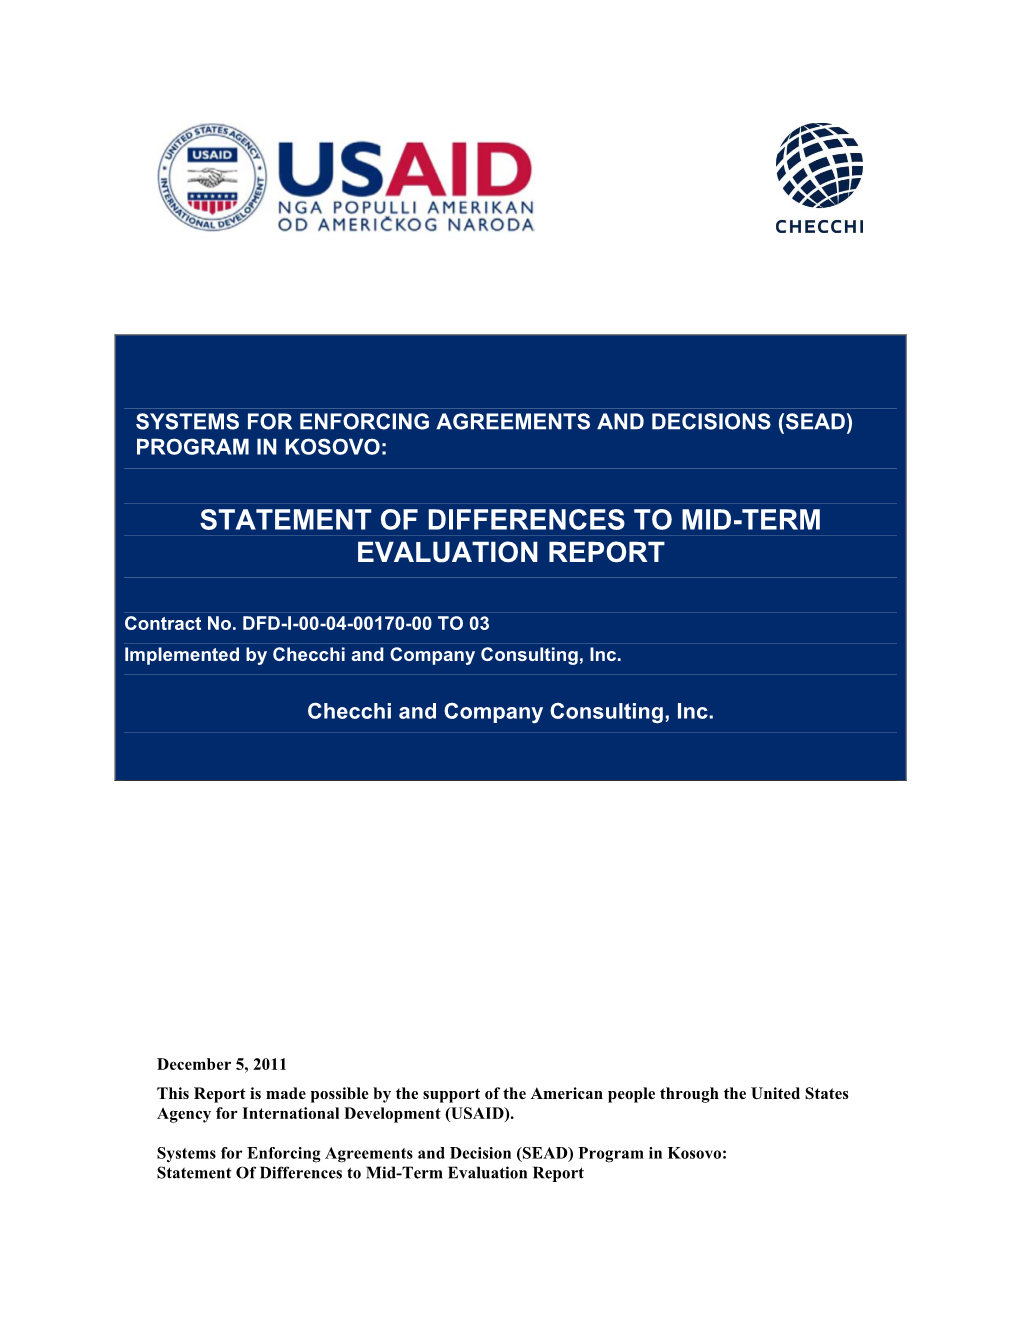 Statement of Differences to Mid-Term Evaluation Report